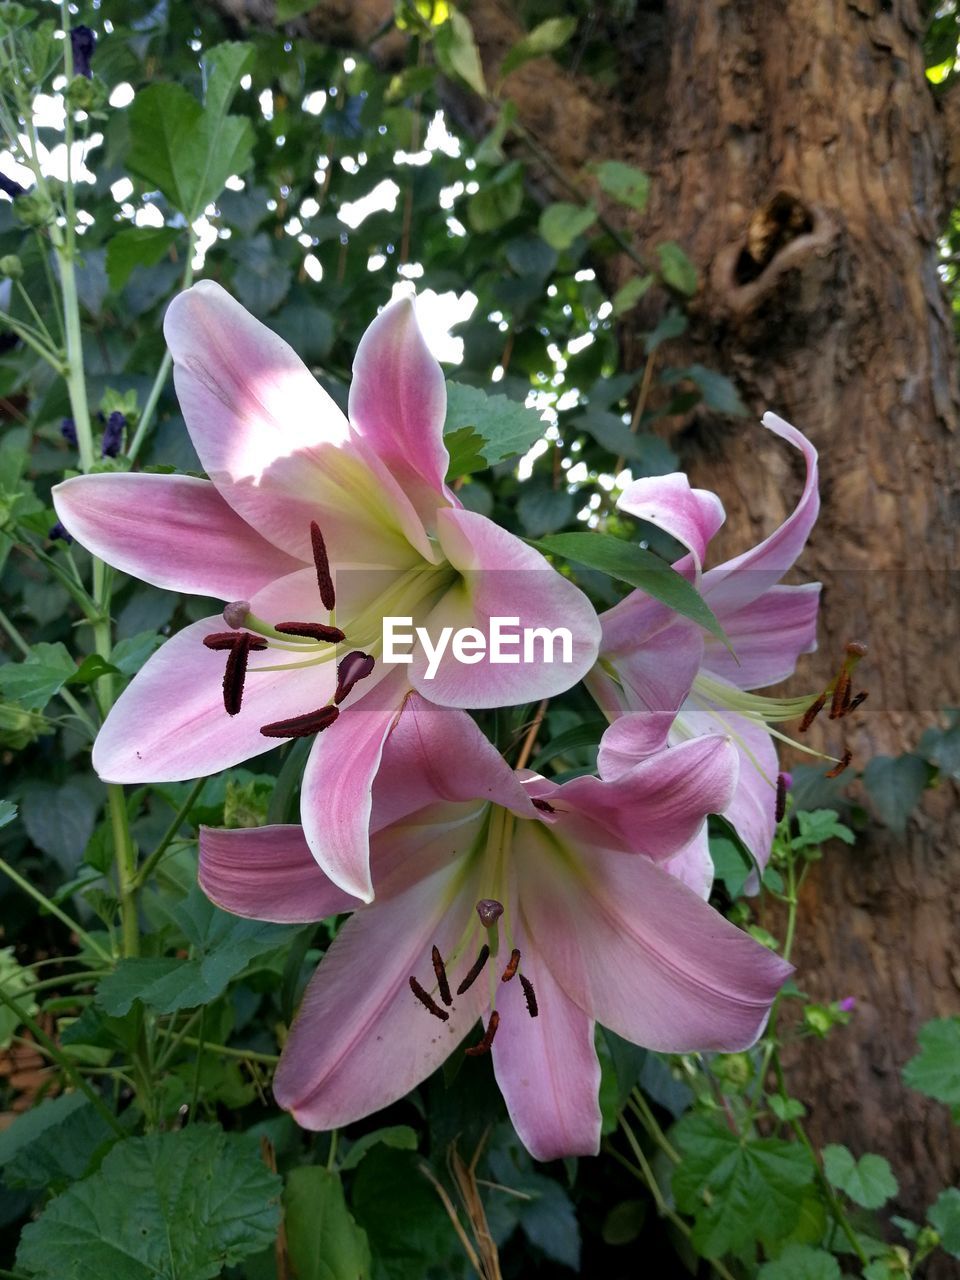 plant, flower, flowering plant, beauty in nature, pink, freshness, growth, petal, fragility, nature, close-up, flower head, inflorescence, leaf, plant part, no people, lily, day, botany, outdoors, wildflower, springtime, blossom, pollen, tree